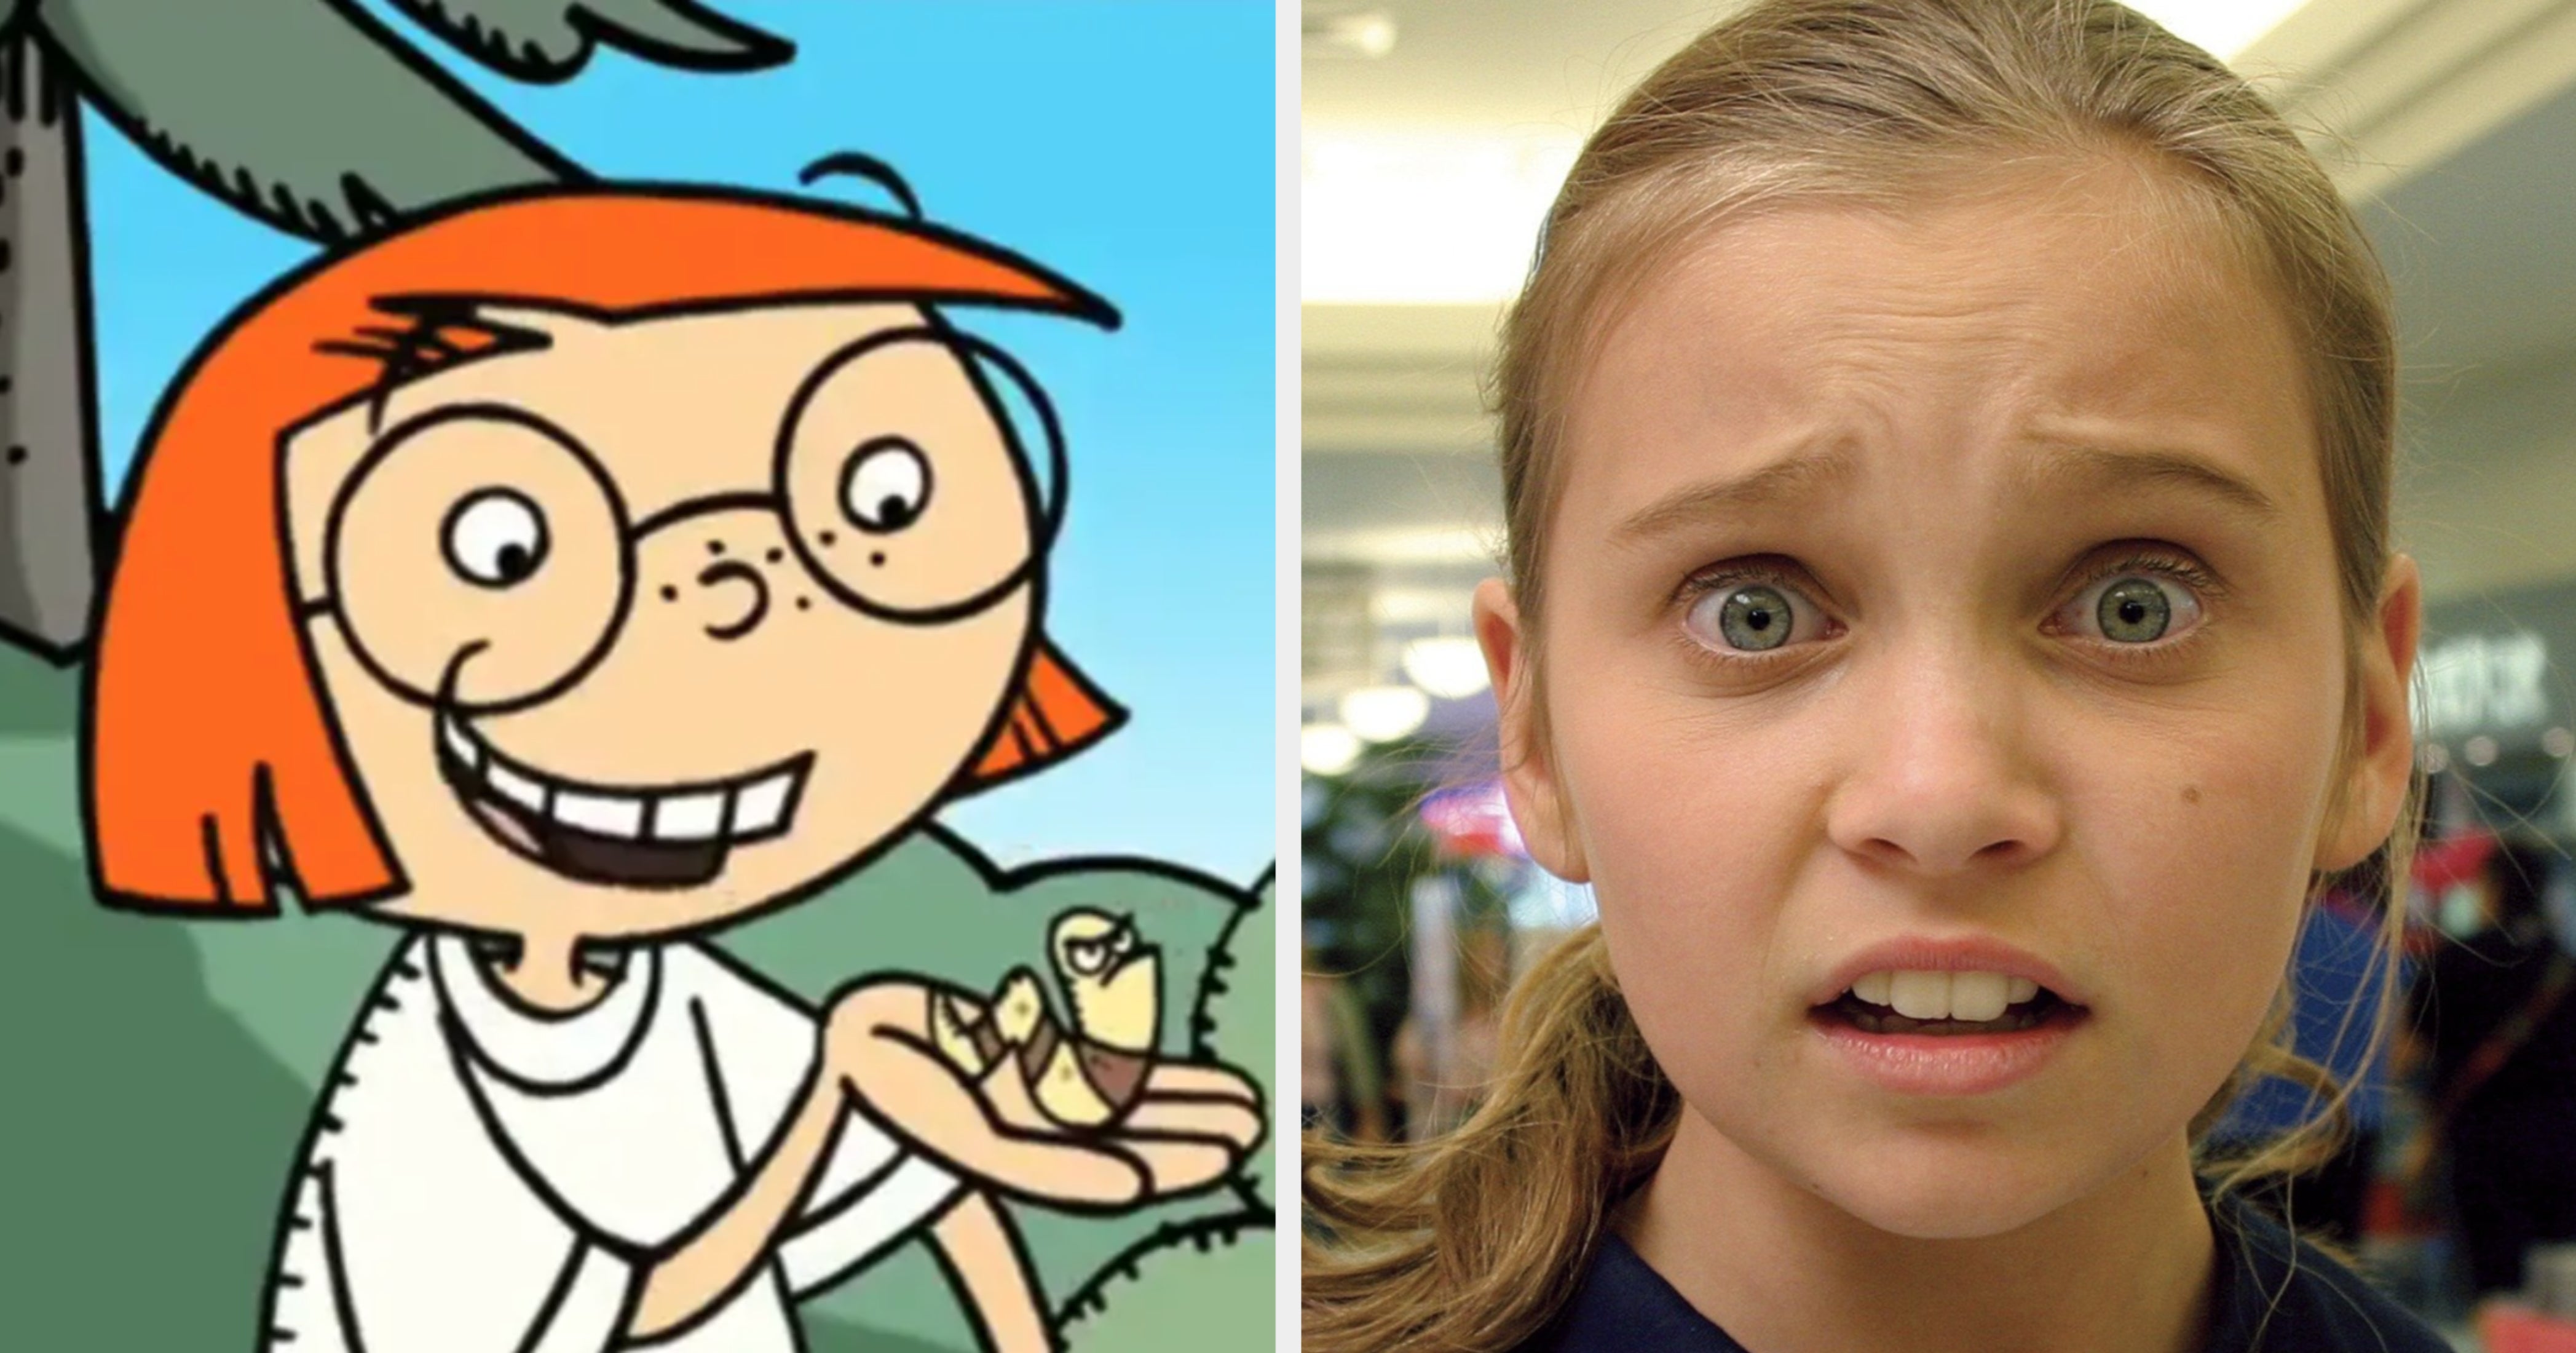 How Well Do You Know Your Aussie Kids Shows Based On The Main Character?